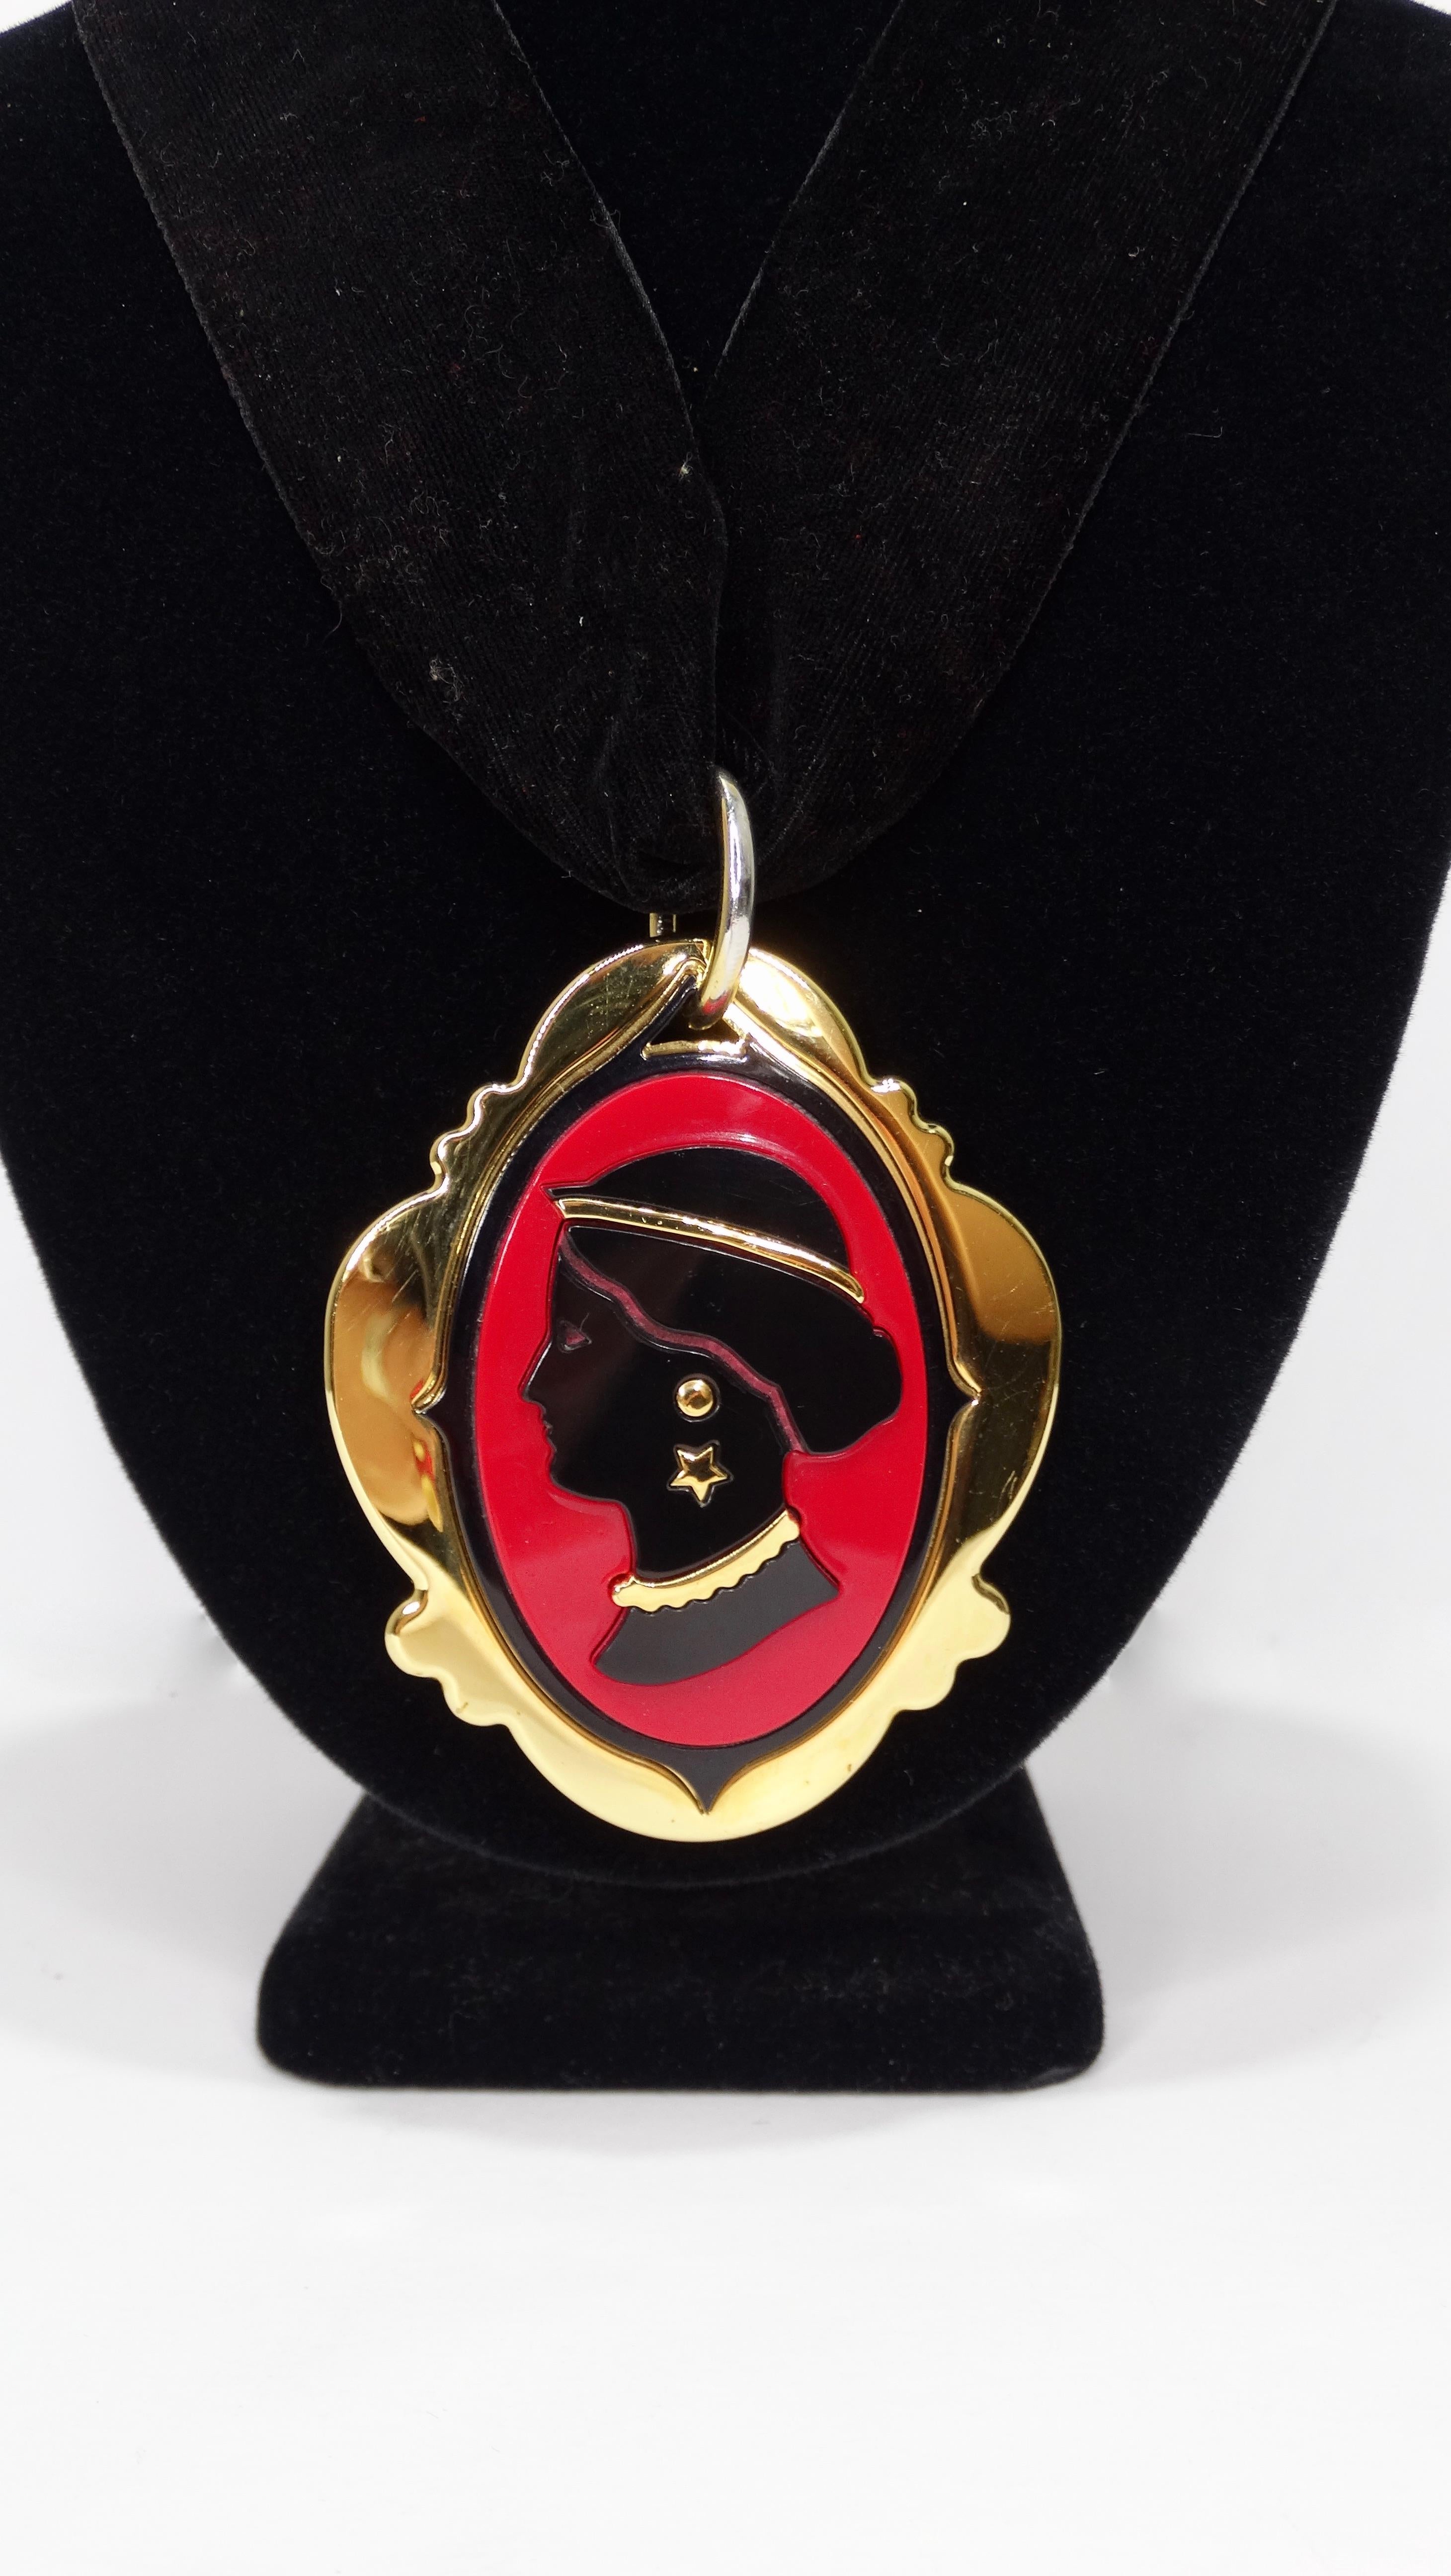 Elevate your look with this amazing Miu Miu cameo necklace! Circa 2012 from their S/S collection, this love token inspired necklace features a thick black velvet ribbon with a large black and red plexi glass cameo pendant. Includes gone toned